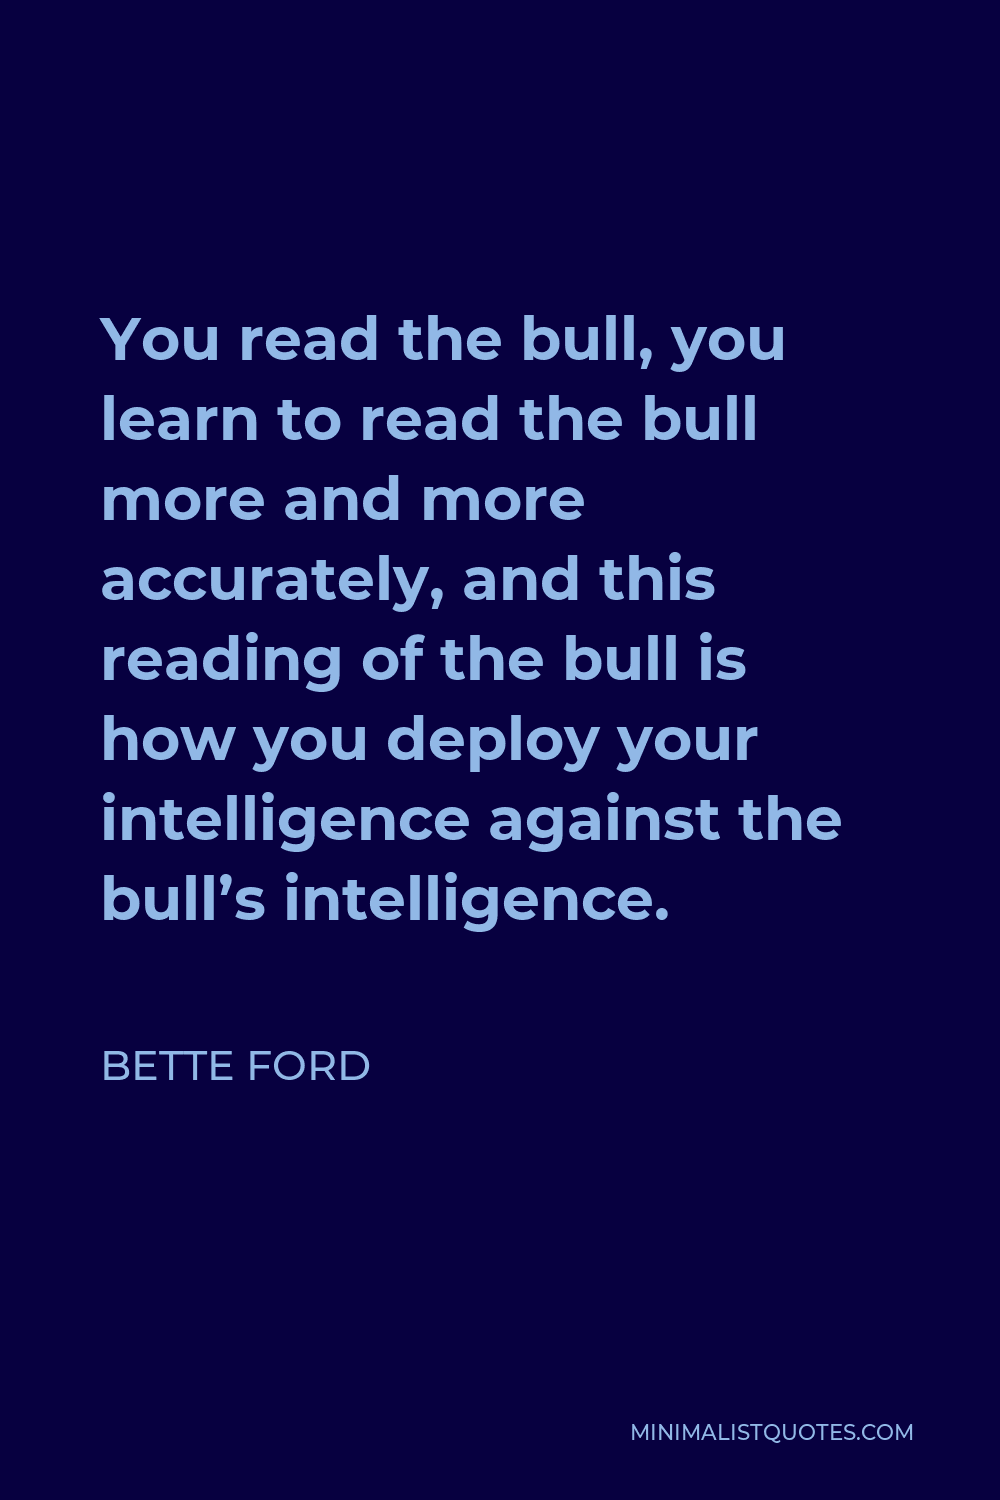 Bette Ford Quote - You read the bull, you learn to read the bull more and more accurately, and this reading of the bull is how you deploy your intelligence against the bull’s intelligence.